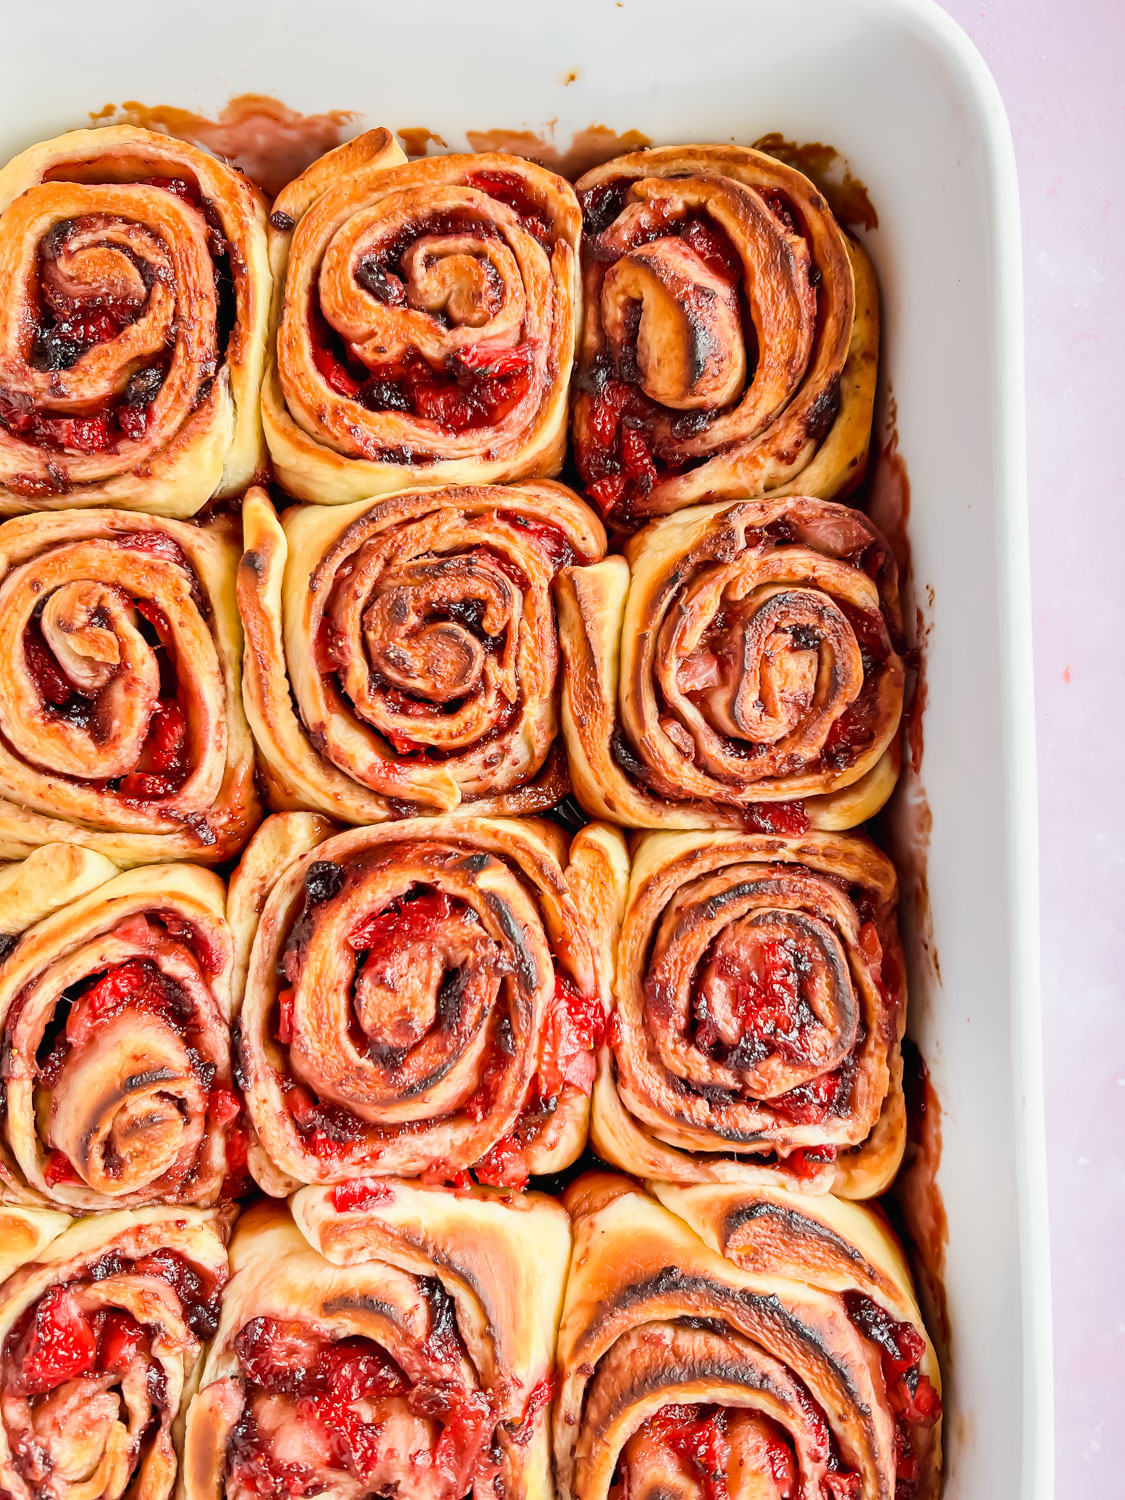 strawberry cinnamon rolls side by side baked in white baking dish.